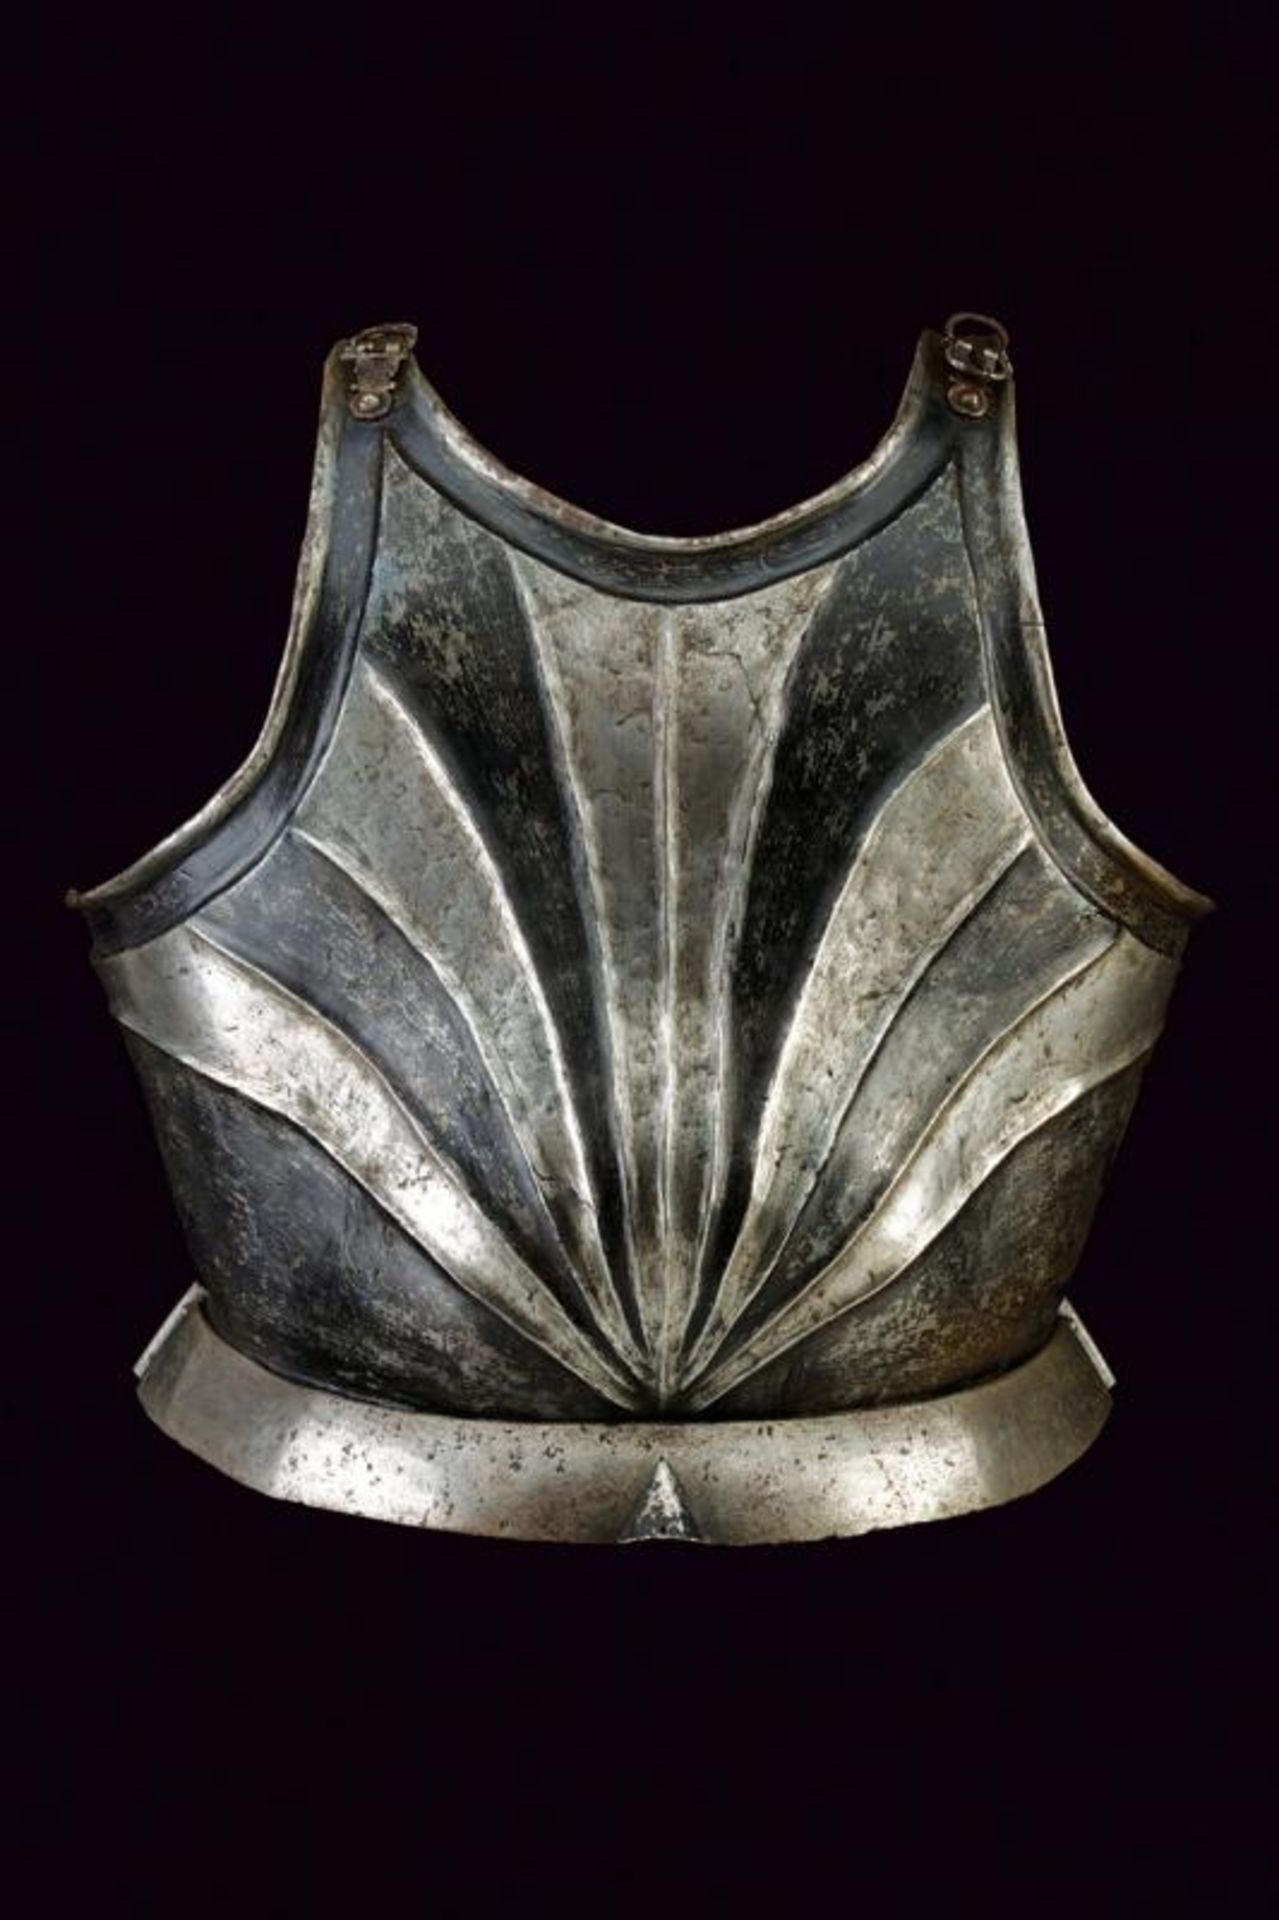 A black and white breast plate